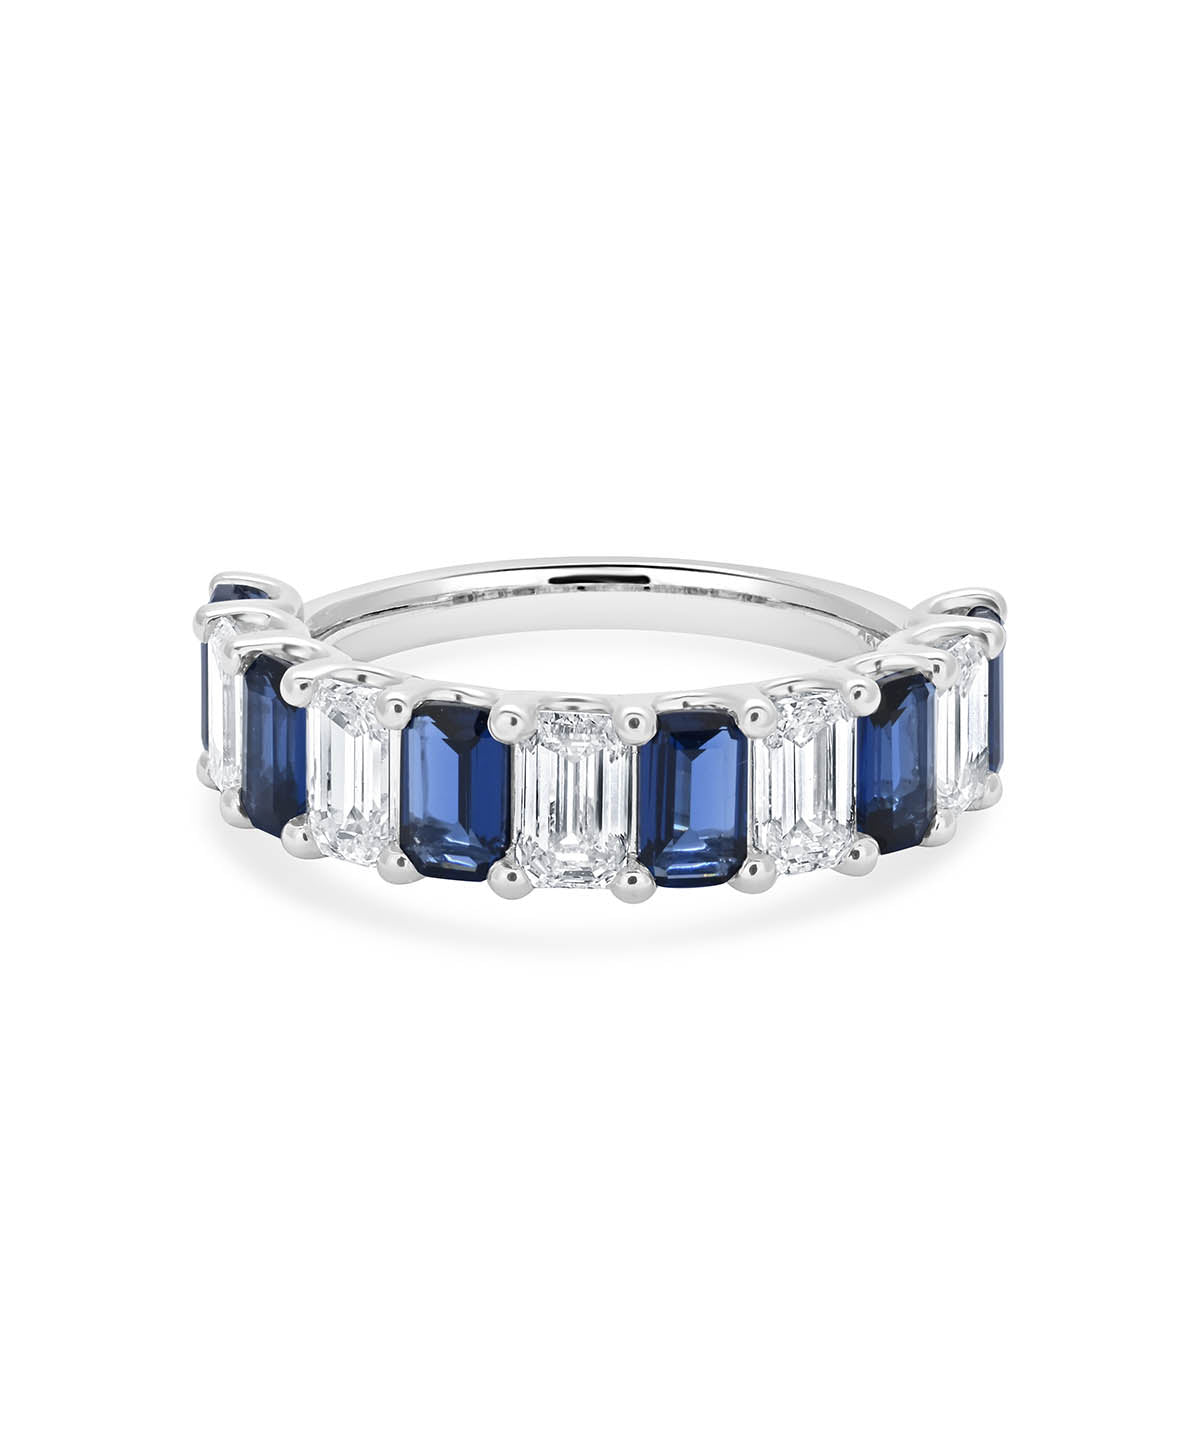 14K White Gold Lab Grown Emerald Cut Diamond and Sapphire Band Ring